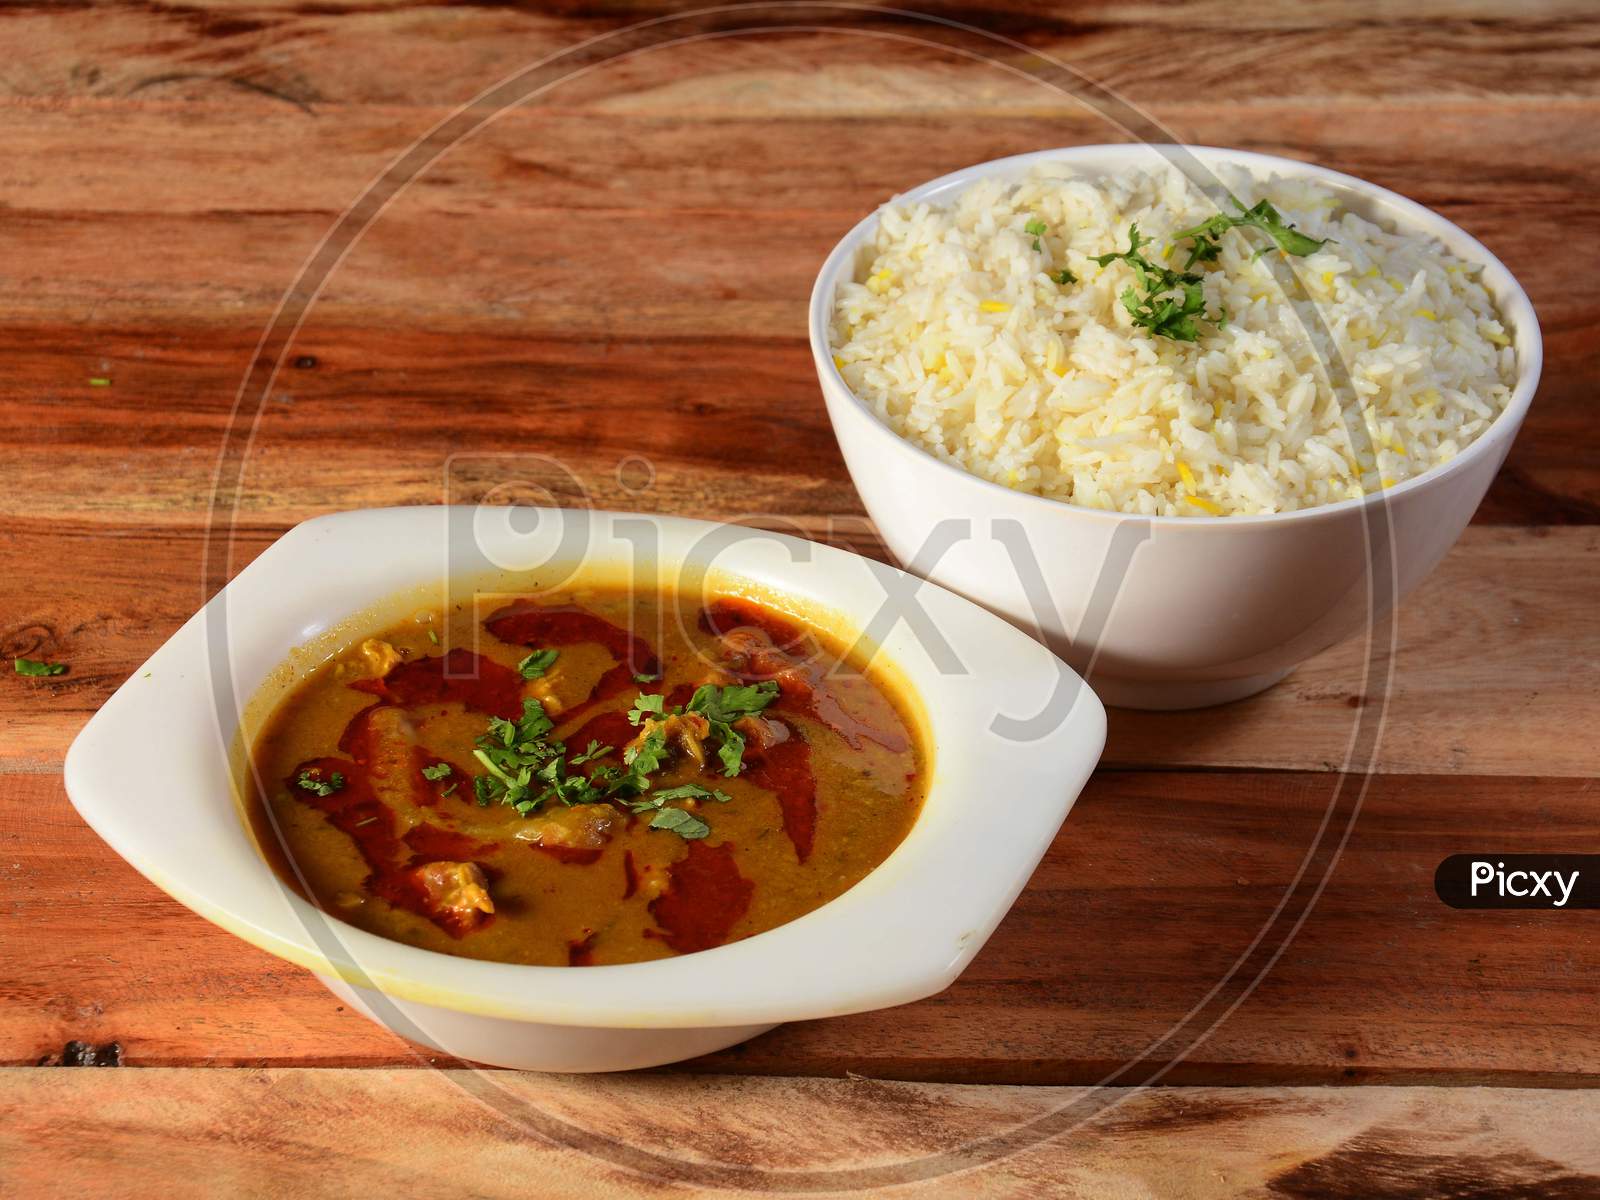 Traditional Indian Cuisine, Beef Curry And Boiled Rice On White Ceramic Bowl On The Rustic Wooden Background